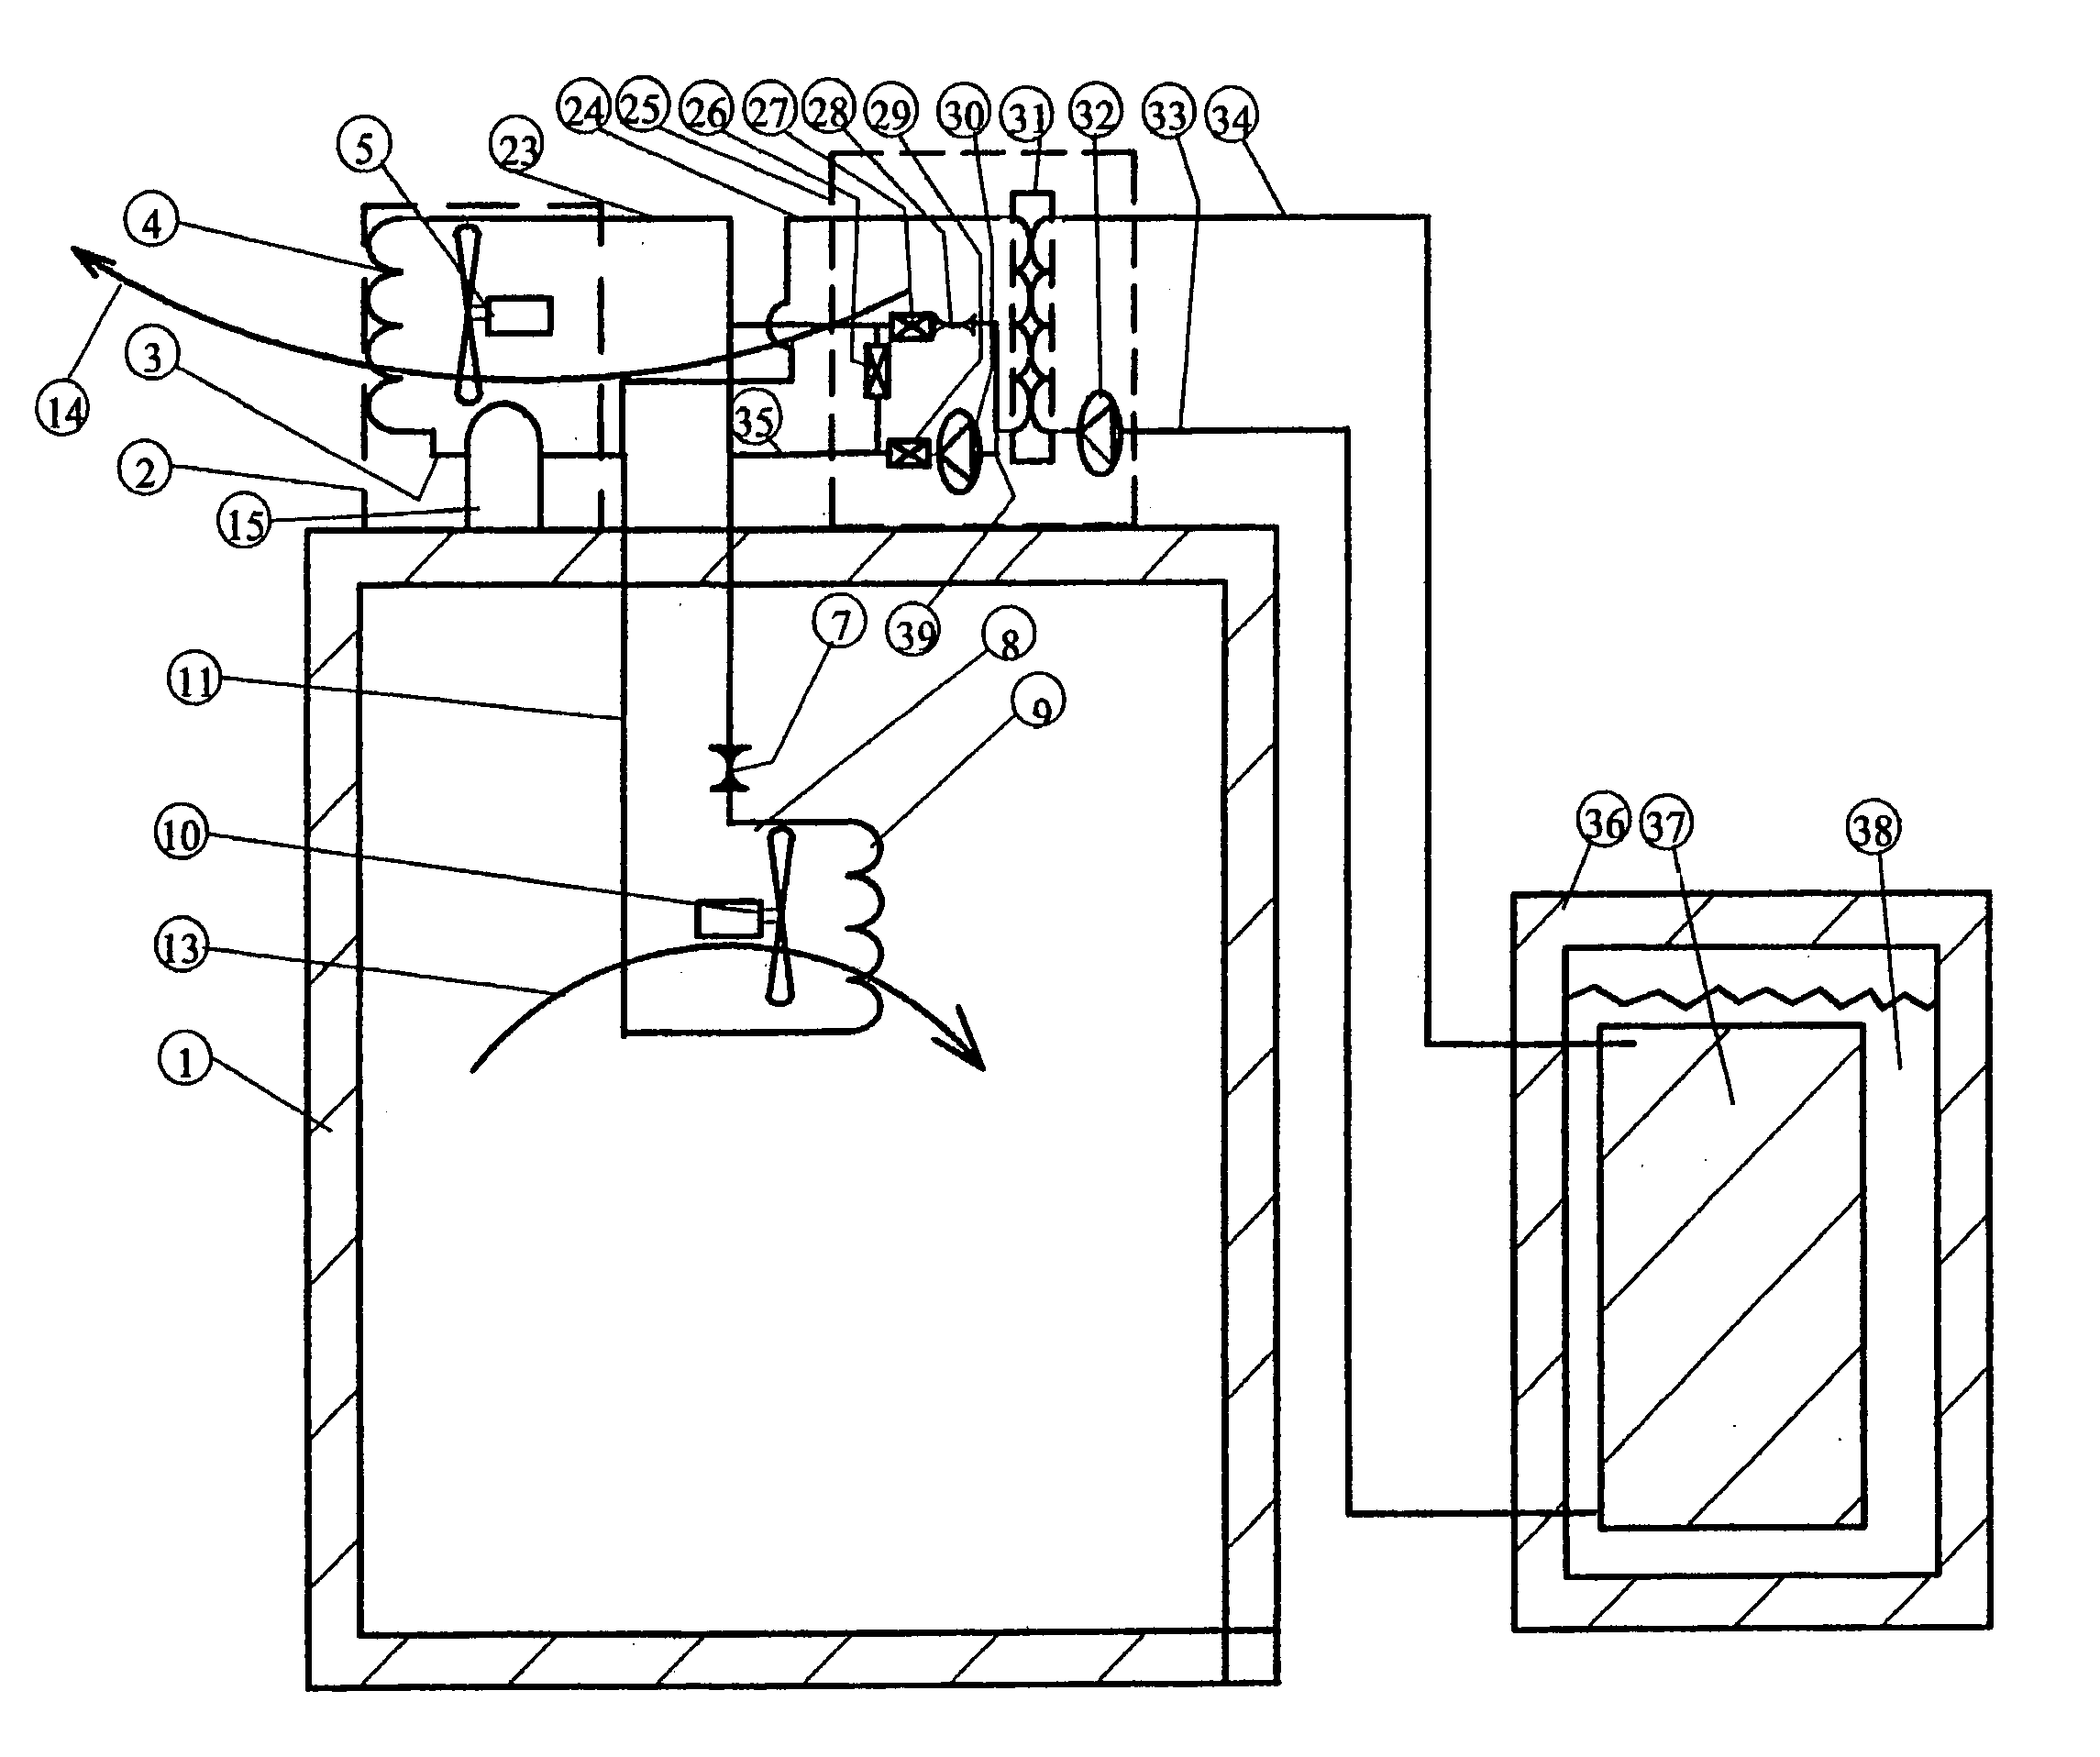 Thermal energy transfer unit and method